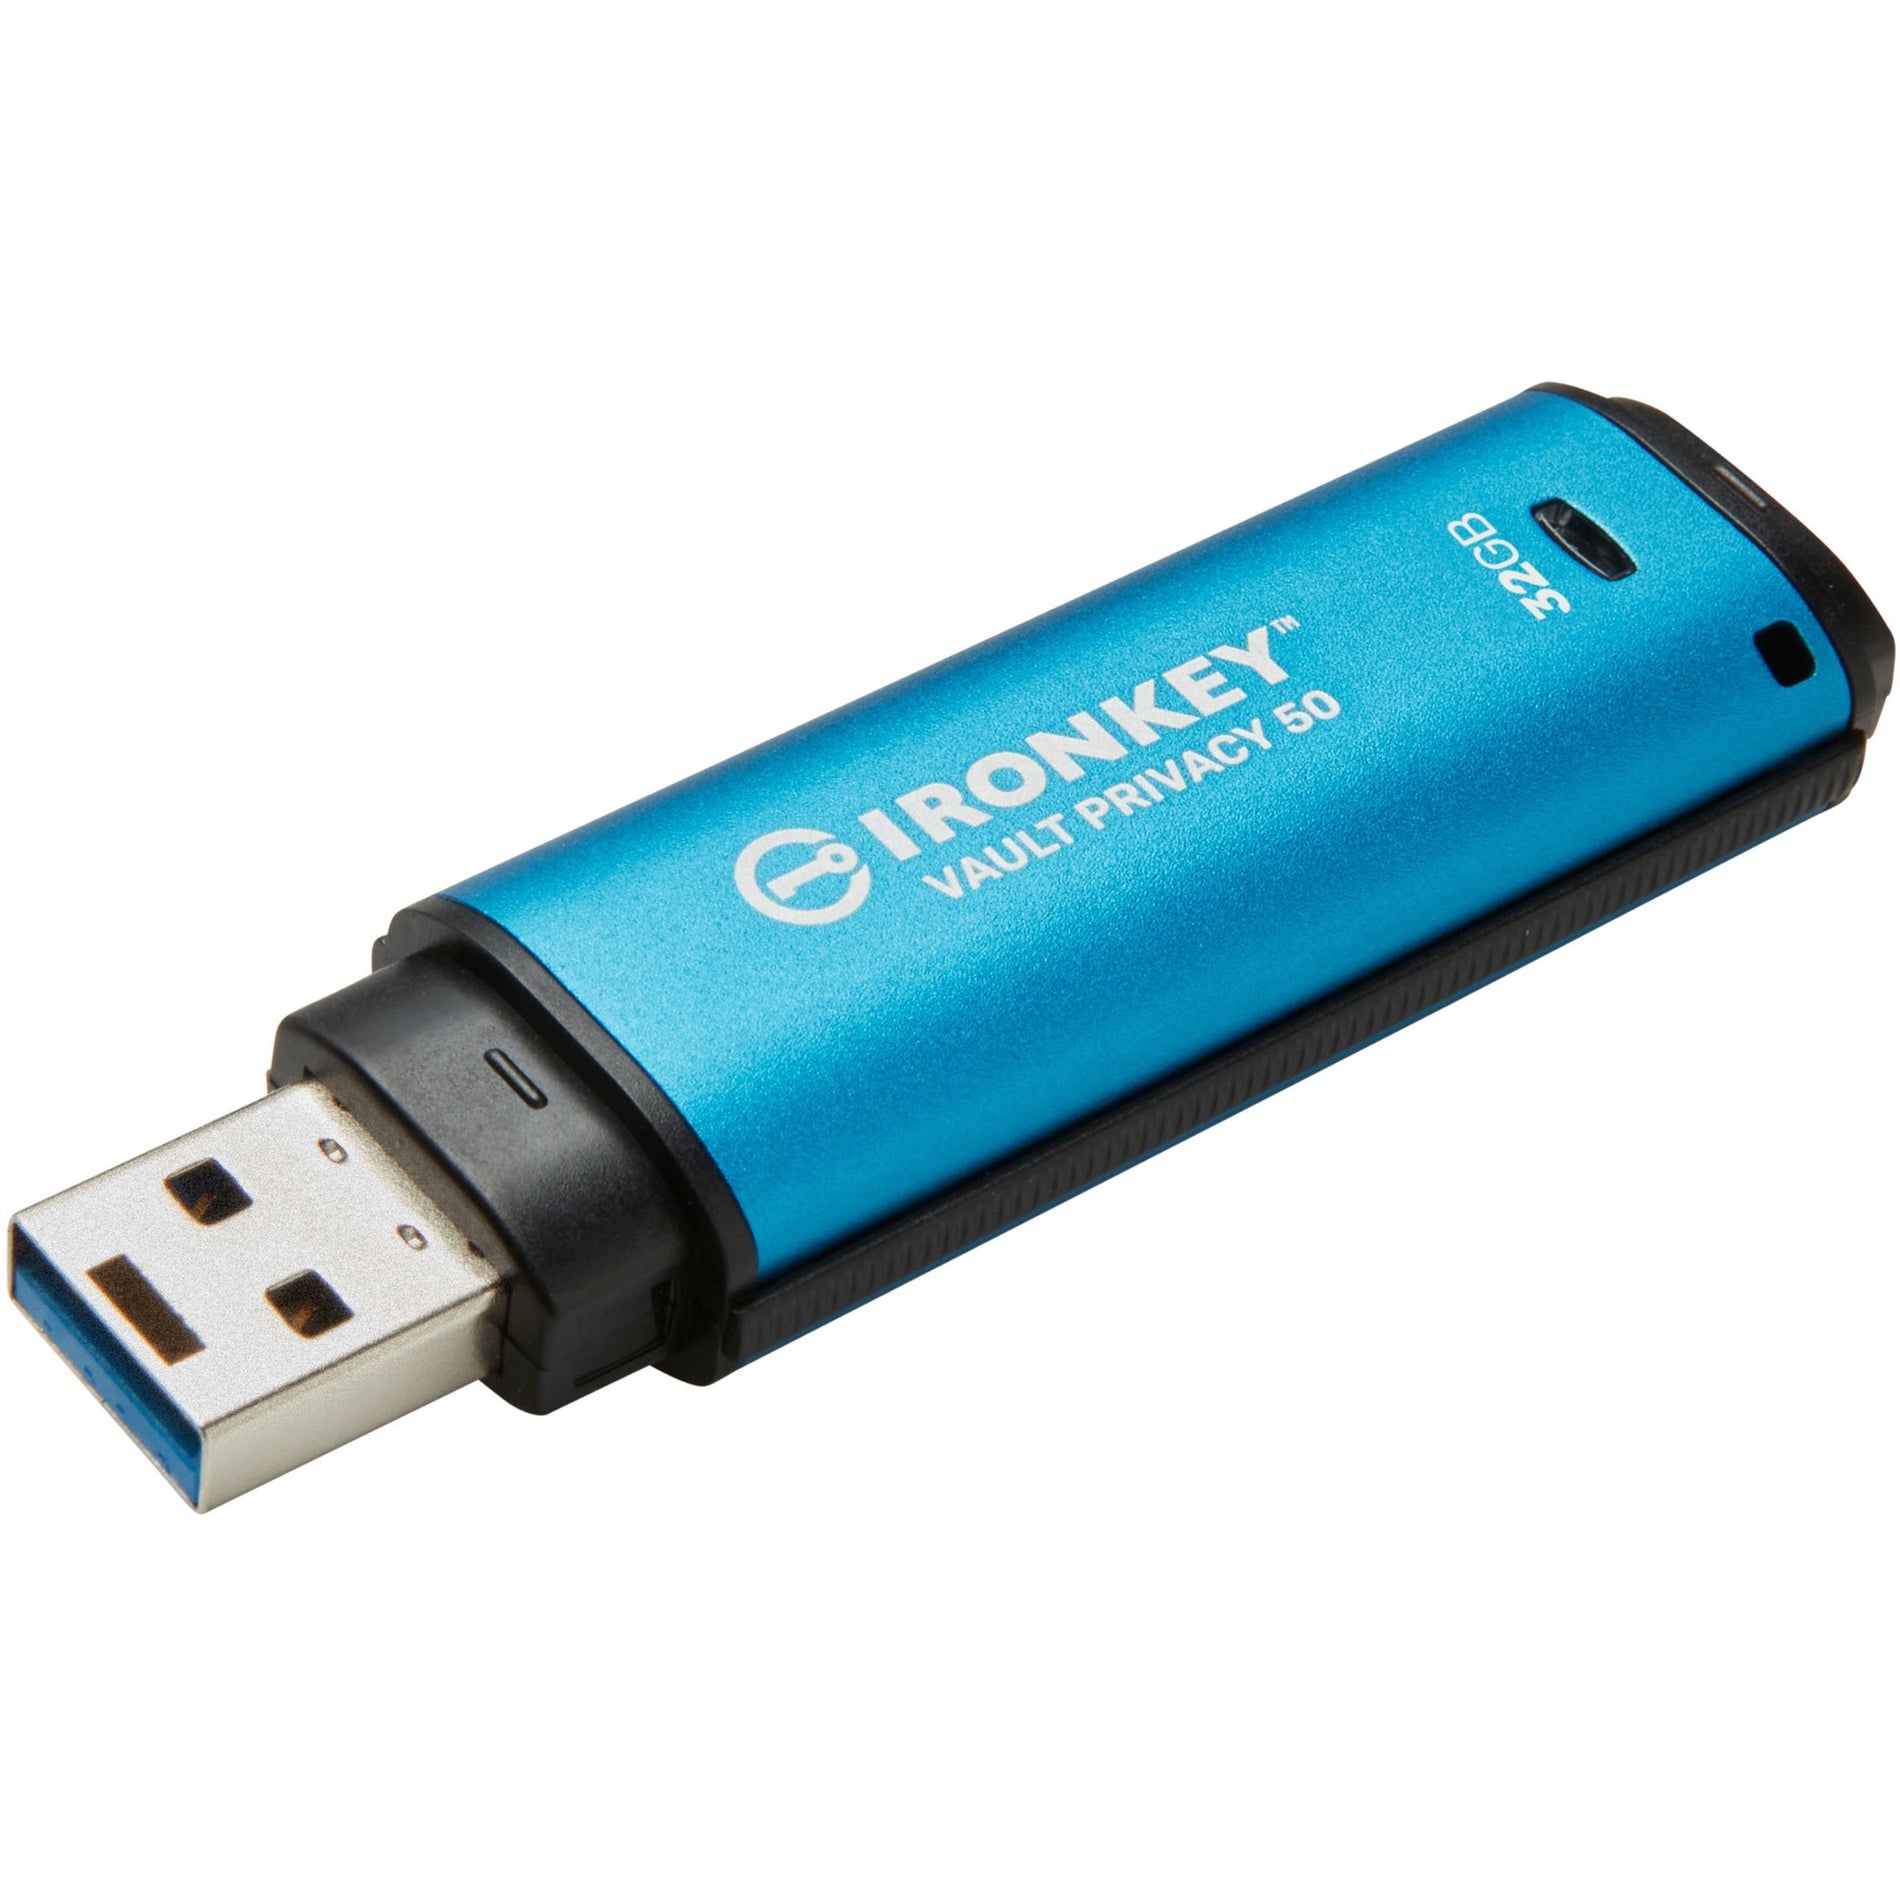 IronKey IKVP50/32GB Vault Privacy 50 Series 32GB USB 3.2 (Gen 1) Type A Flash Drive, Password Protection, 256-bit AES Encryption